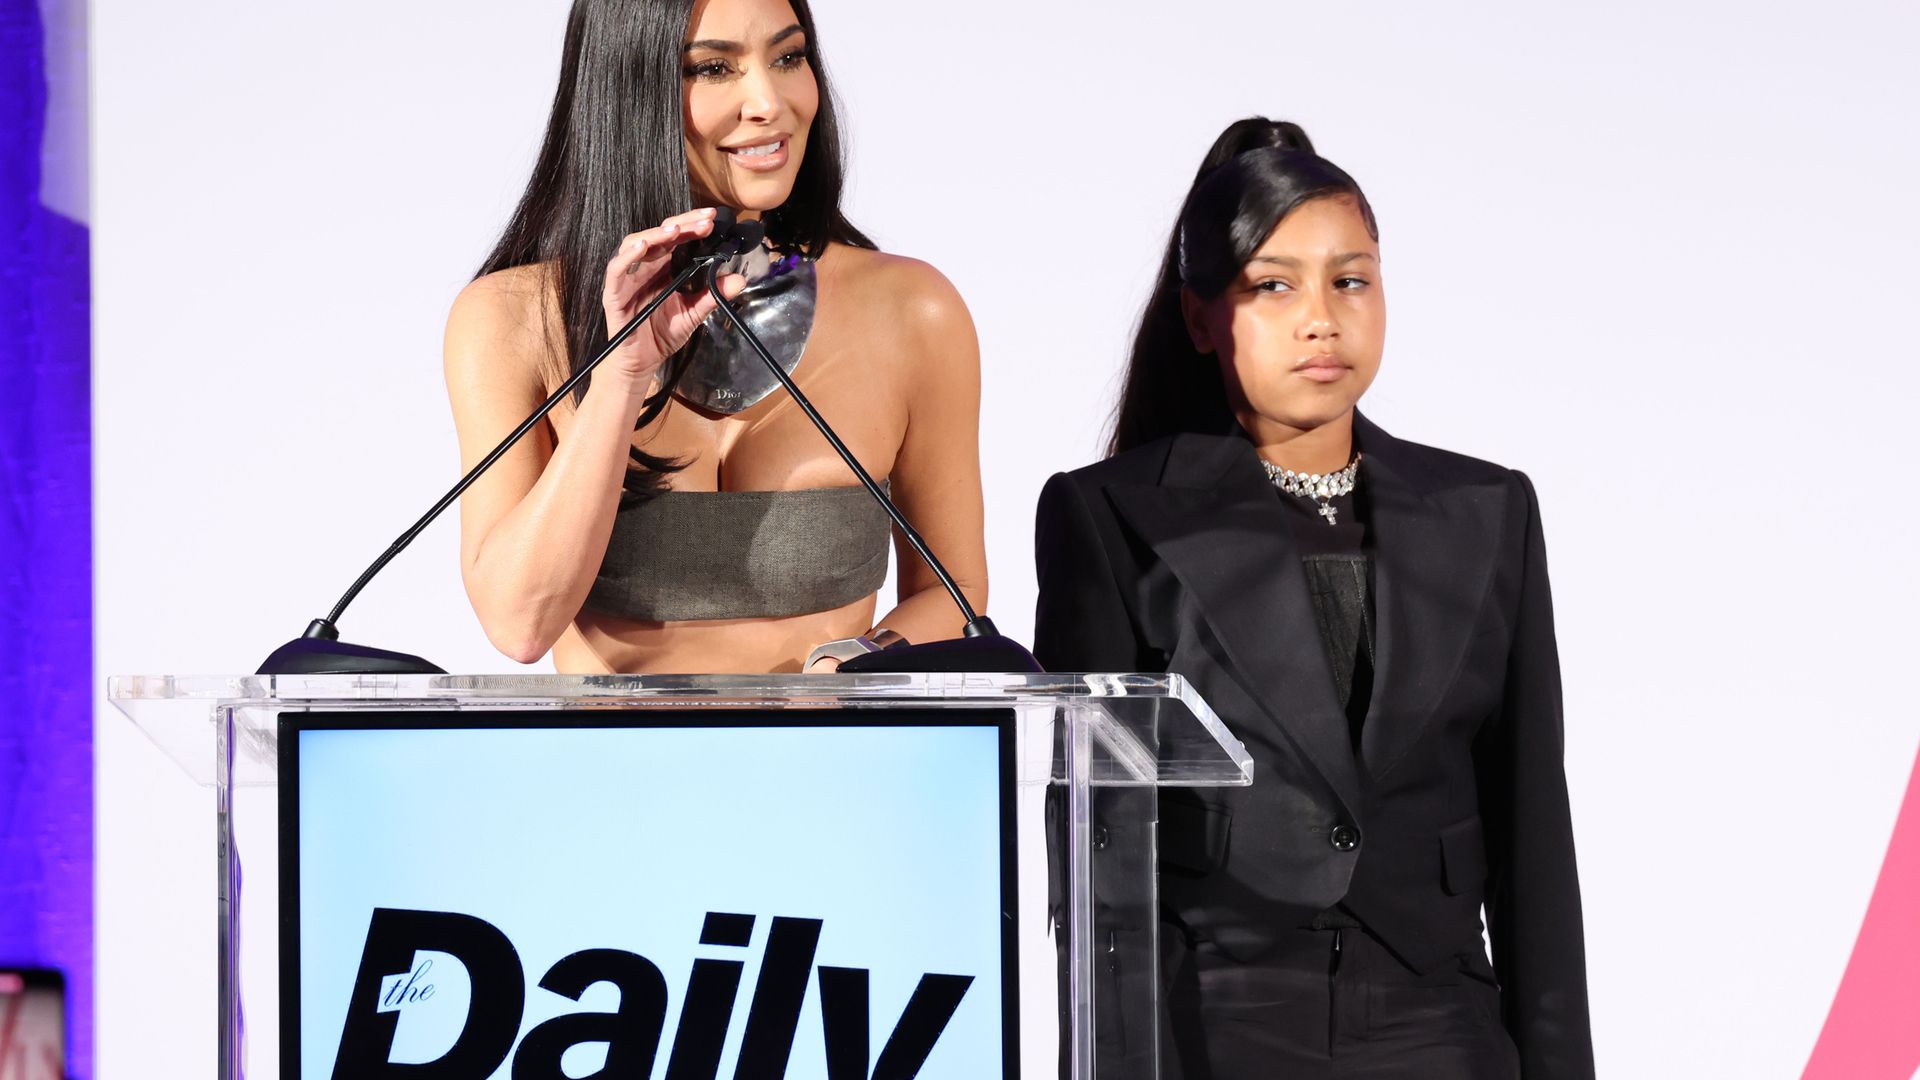 Kim Kardashian opens up about daughter North West's incredible skill - 'it's great to see how passionate she gets about it'